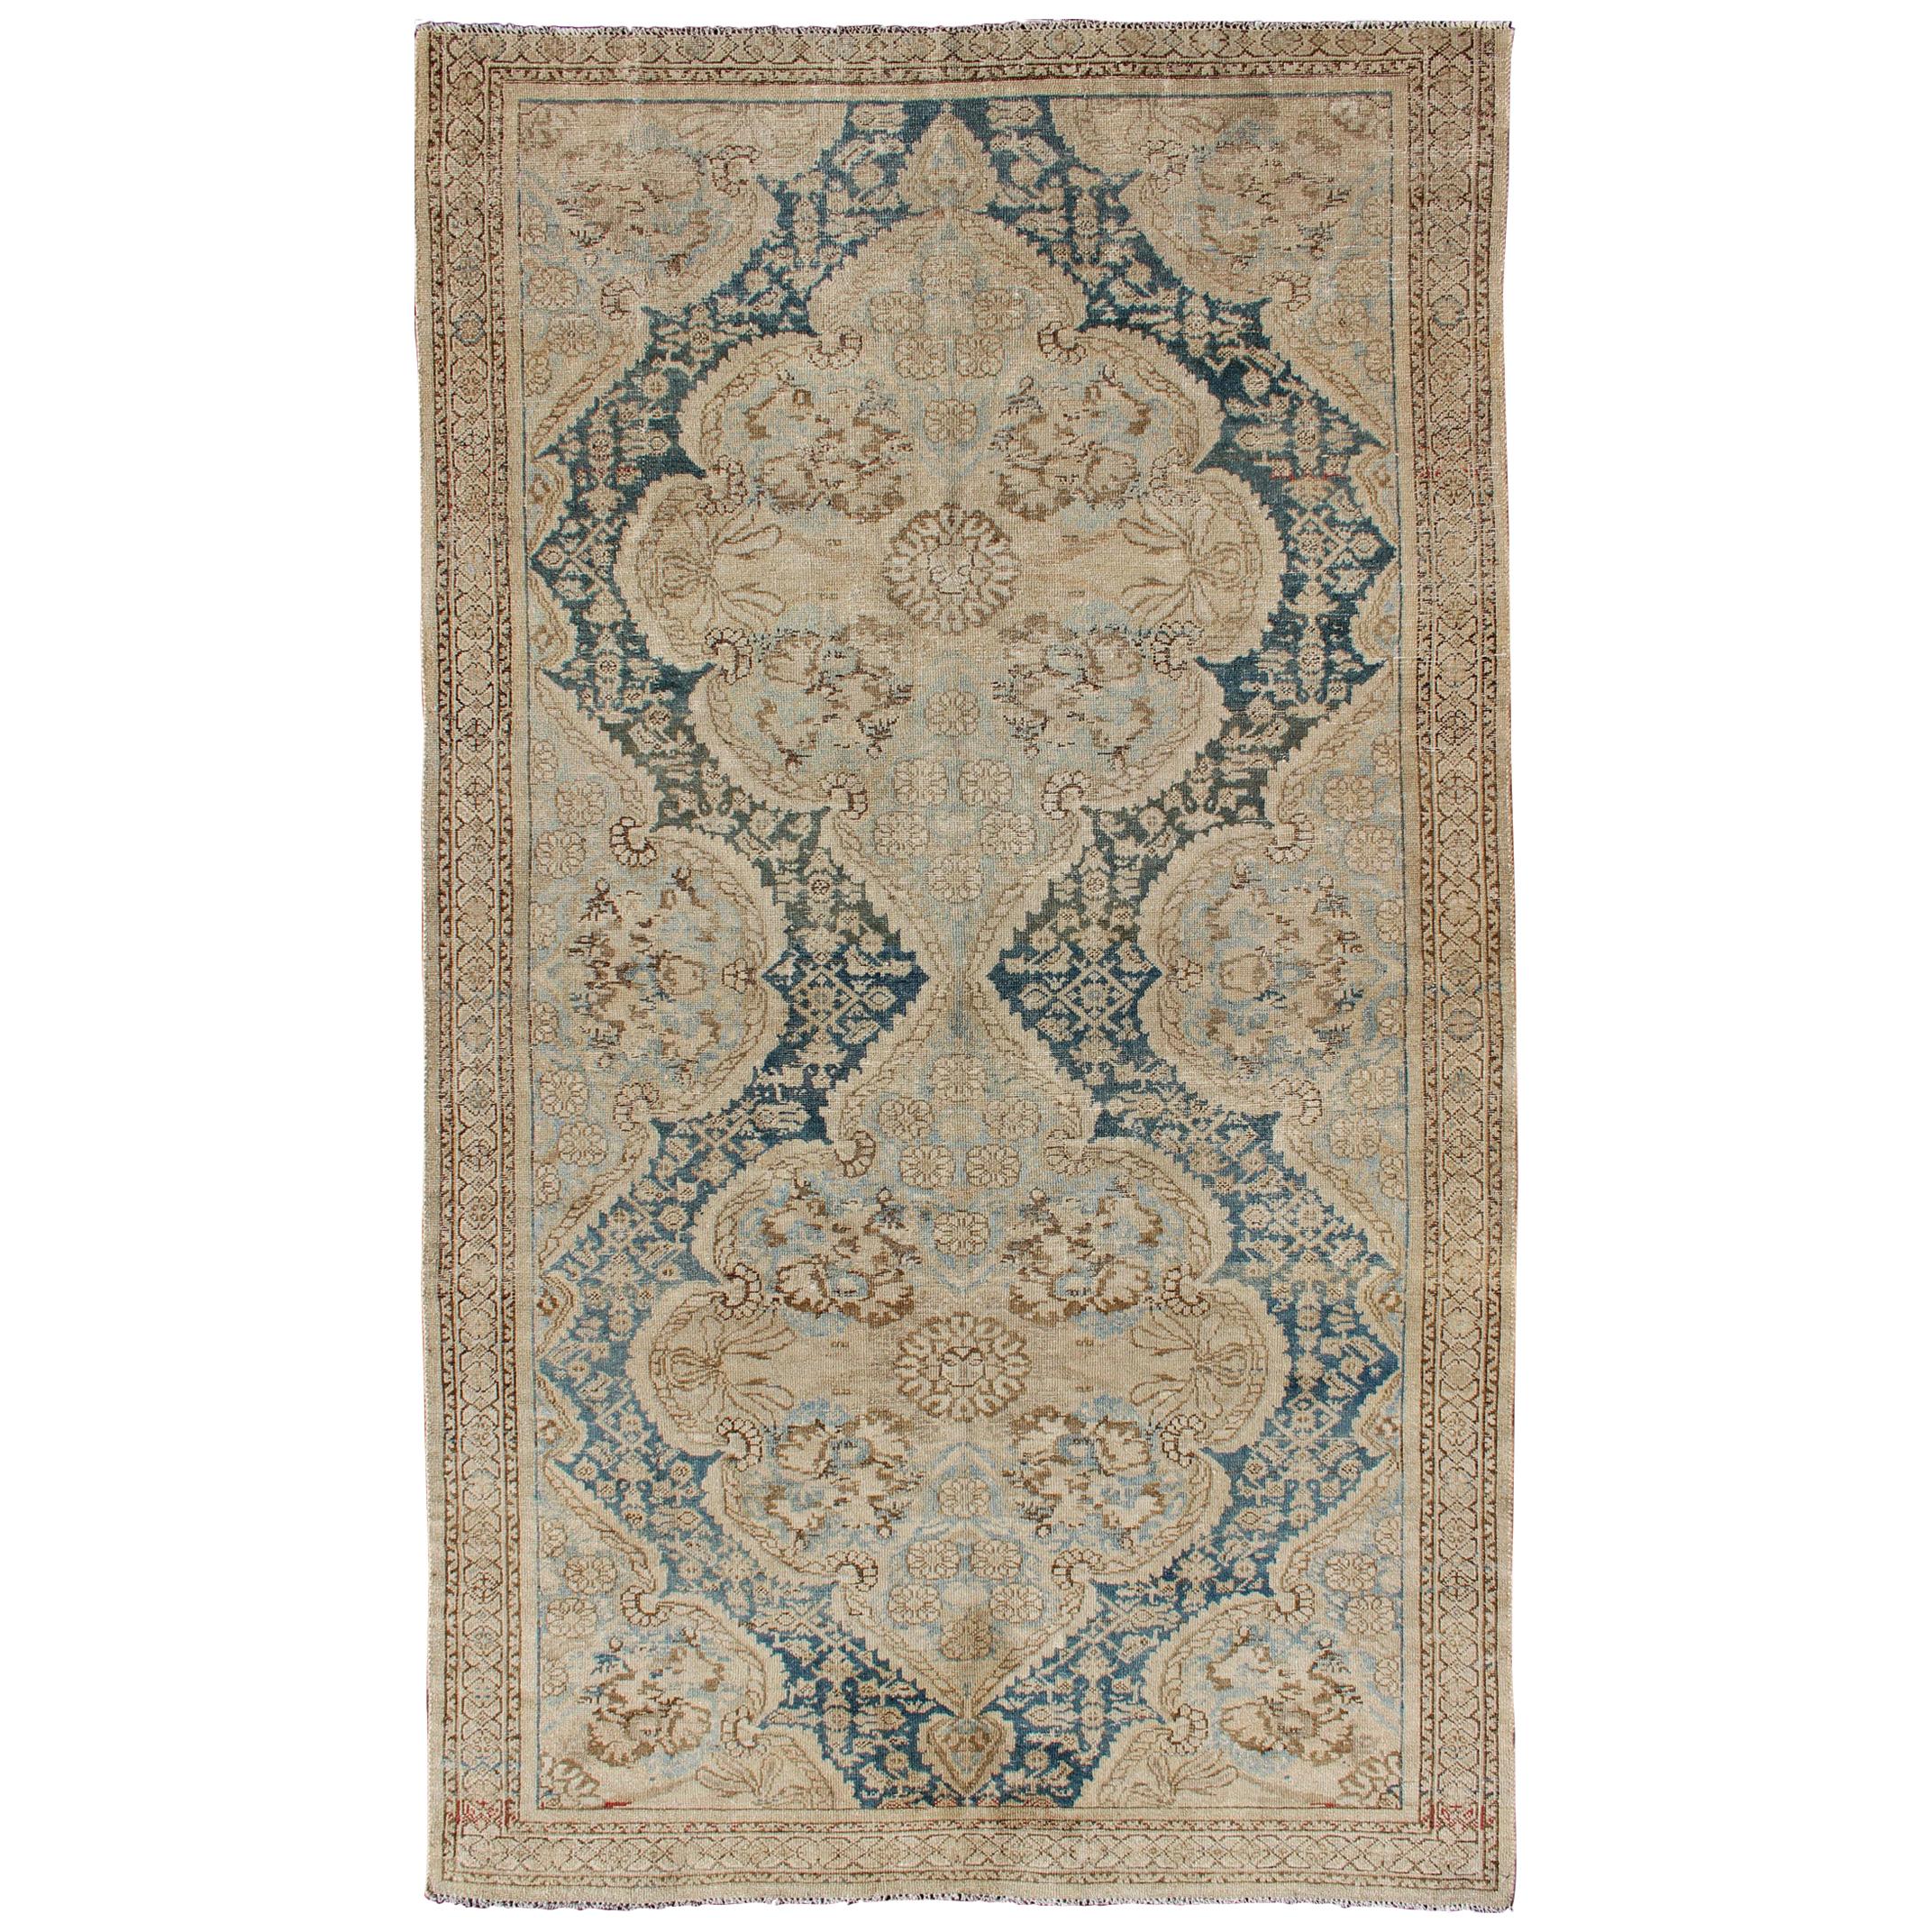 Blue and Brown Antique Persian Malayer Short Gallery Rug with Floral Medallions